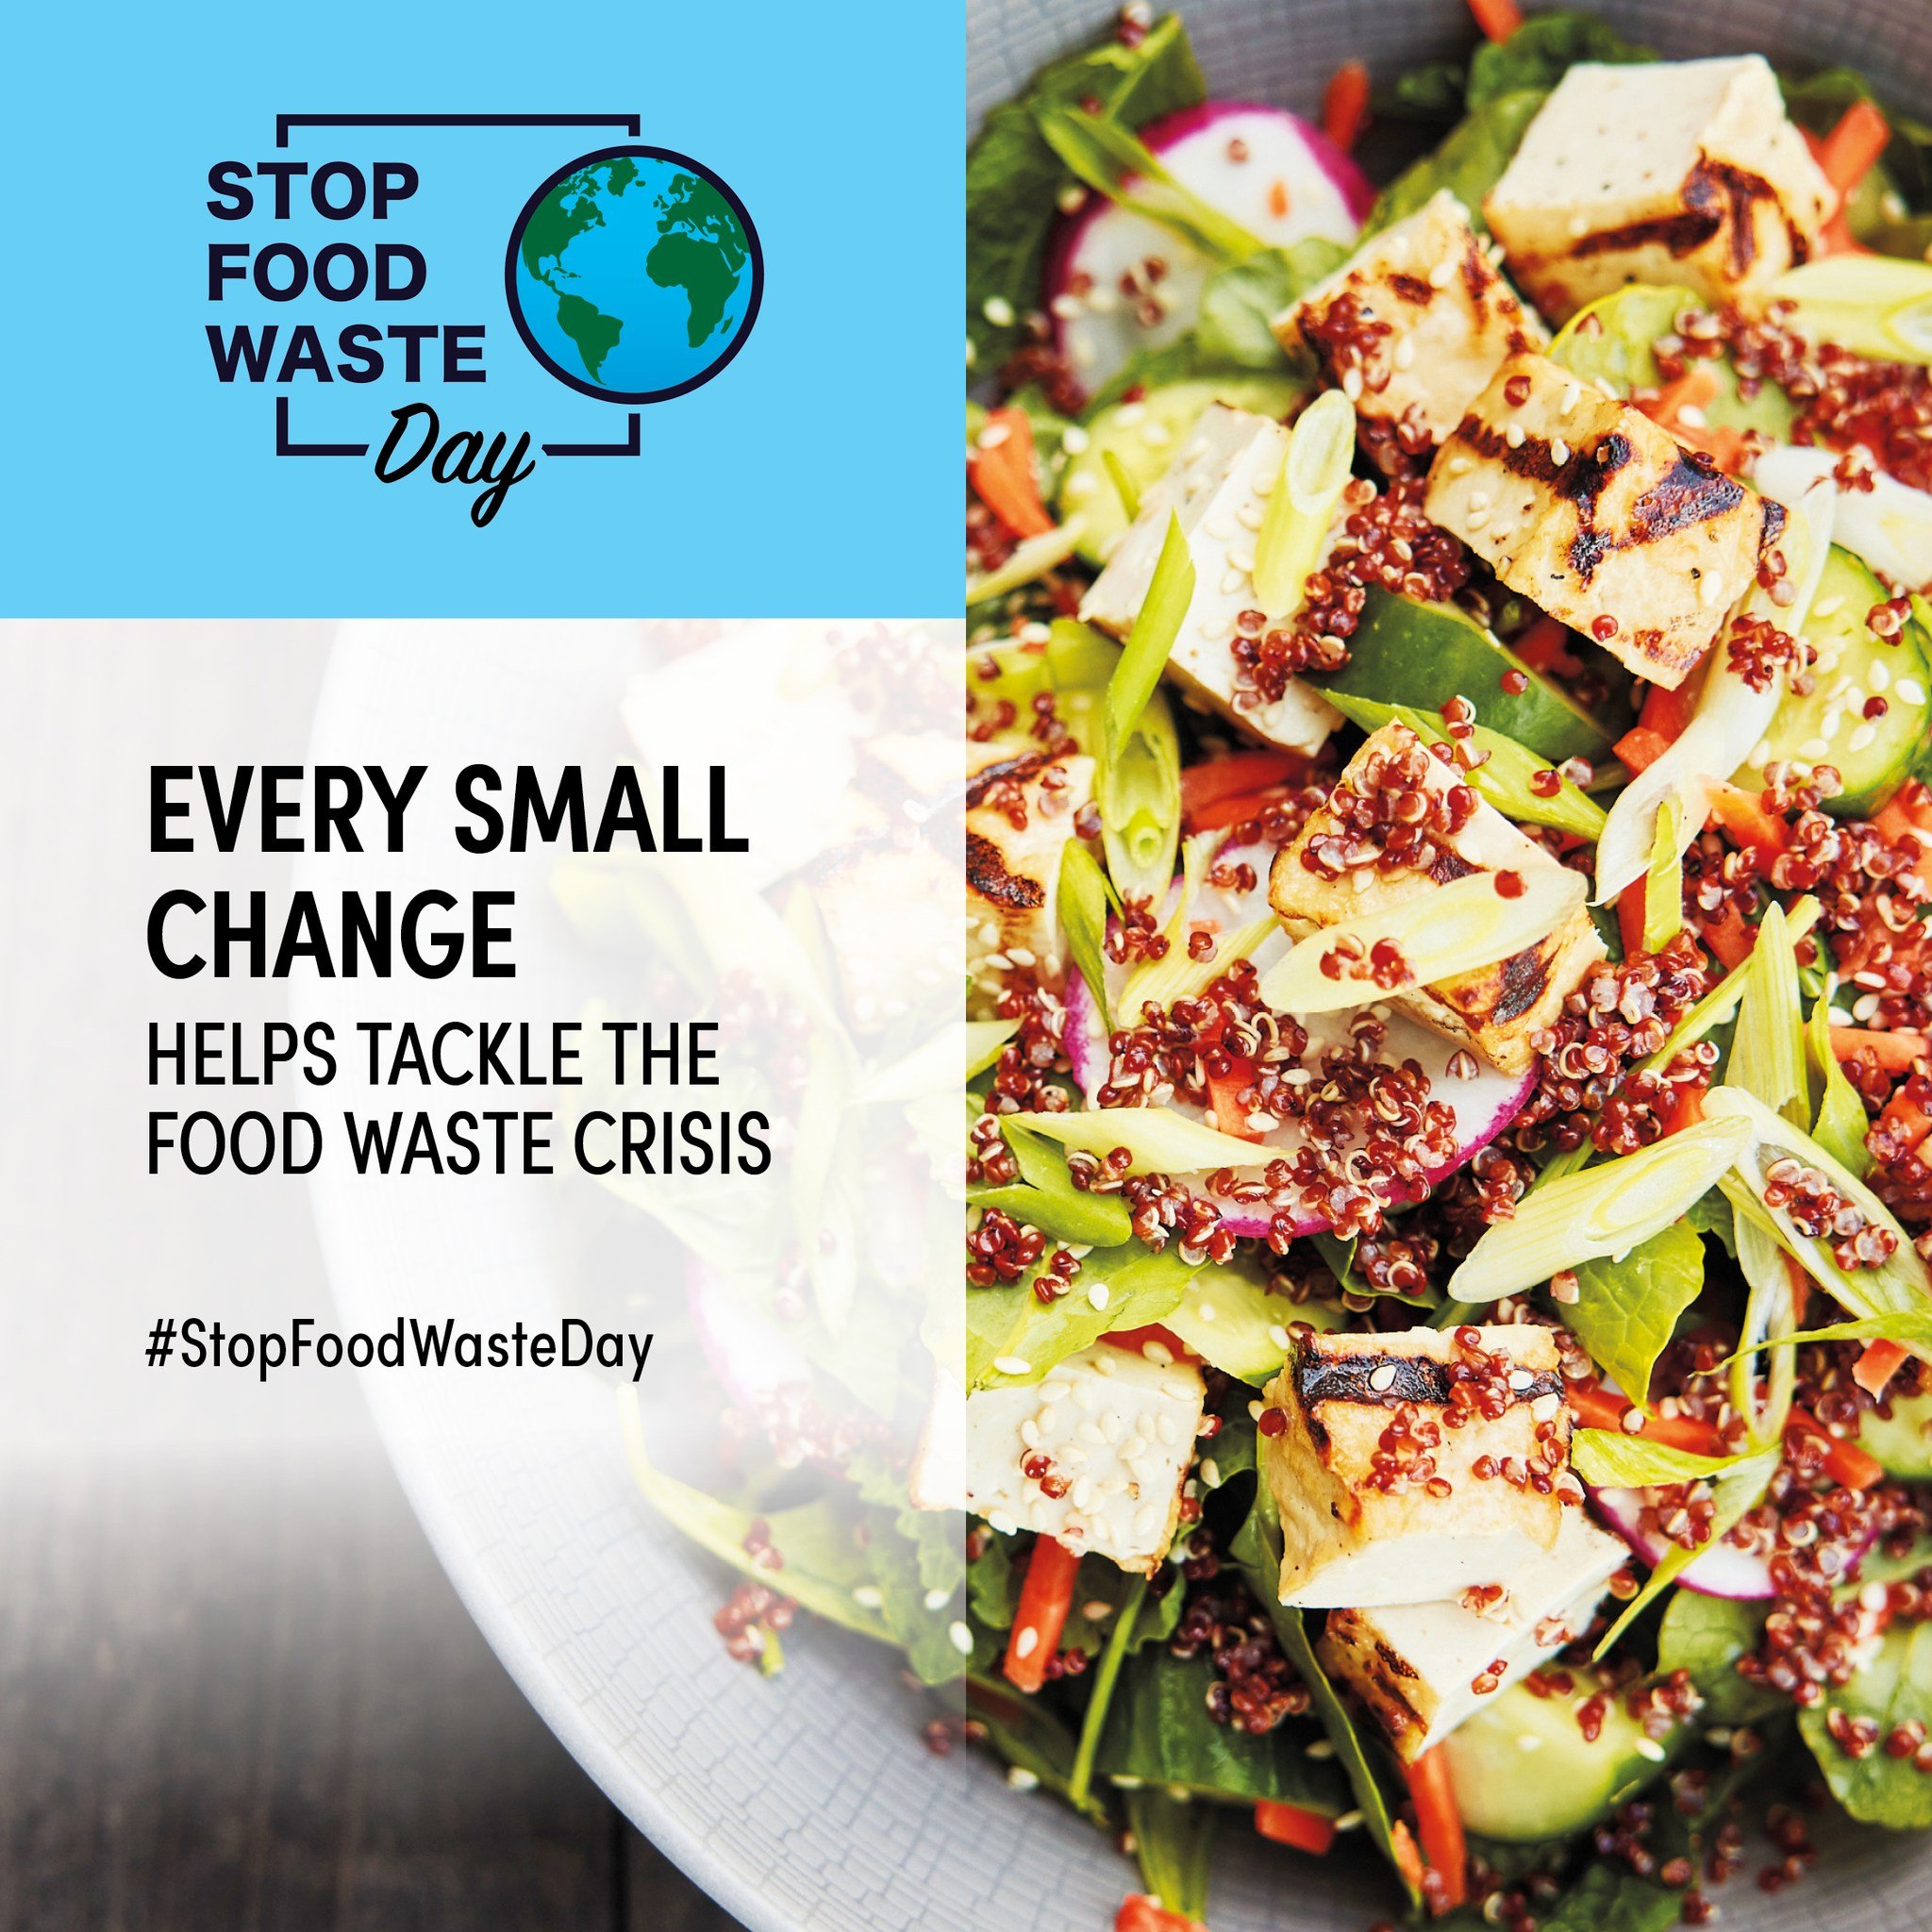 Today marks the annual #StopFoodWasteDay which is the global awareness day dedicated to reducing food waste, a key contributor to climate change. Wasting food is a waste of the energy to grow, harvest, process and cook and food waste in landfill can 